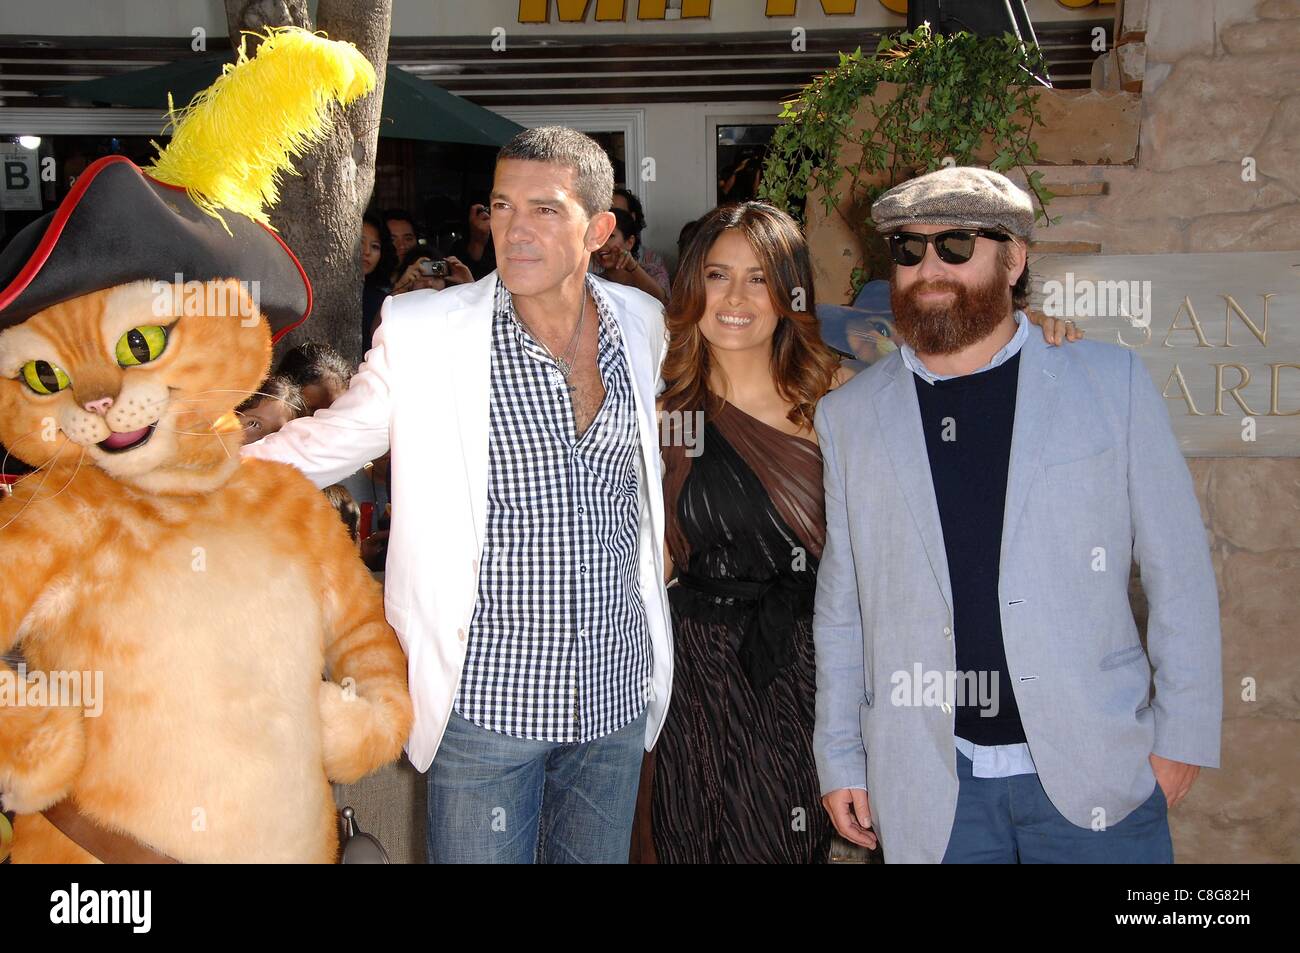 Antonio Banderas, Zach Galifianakis, Salma Hayek at arrivals for PUSS IN BOOTS Premiere, Regency Village Theater in Westwood, Los Angeles, CA October 23, 2011. Photo By: Michael Germana/Everett Collection Stock Photo